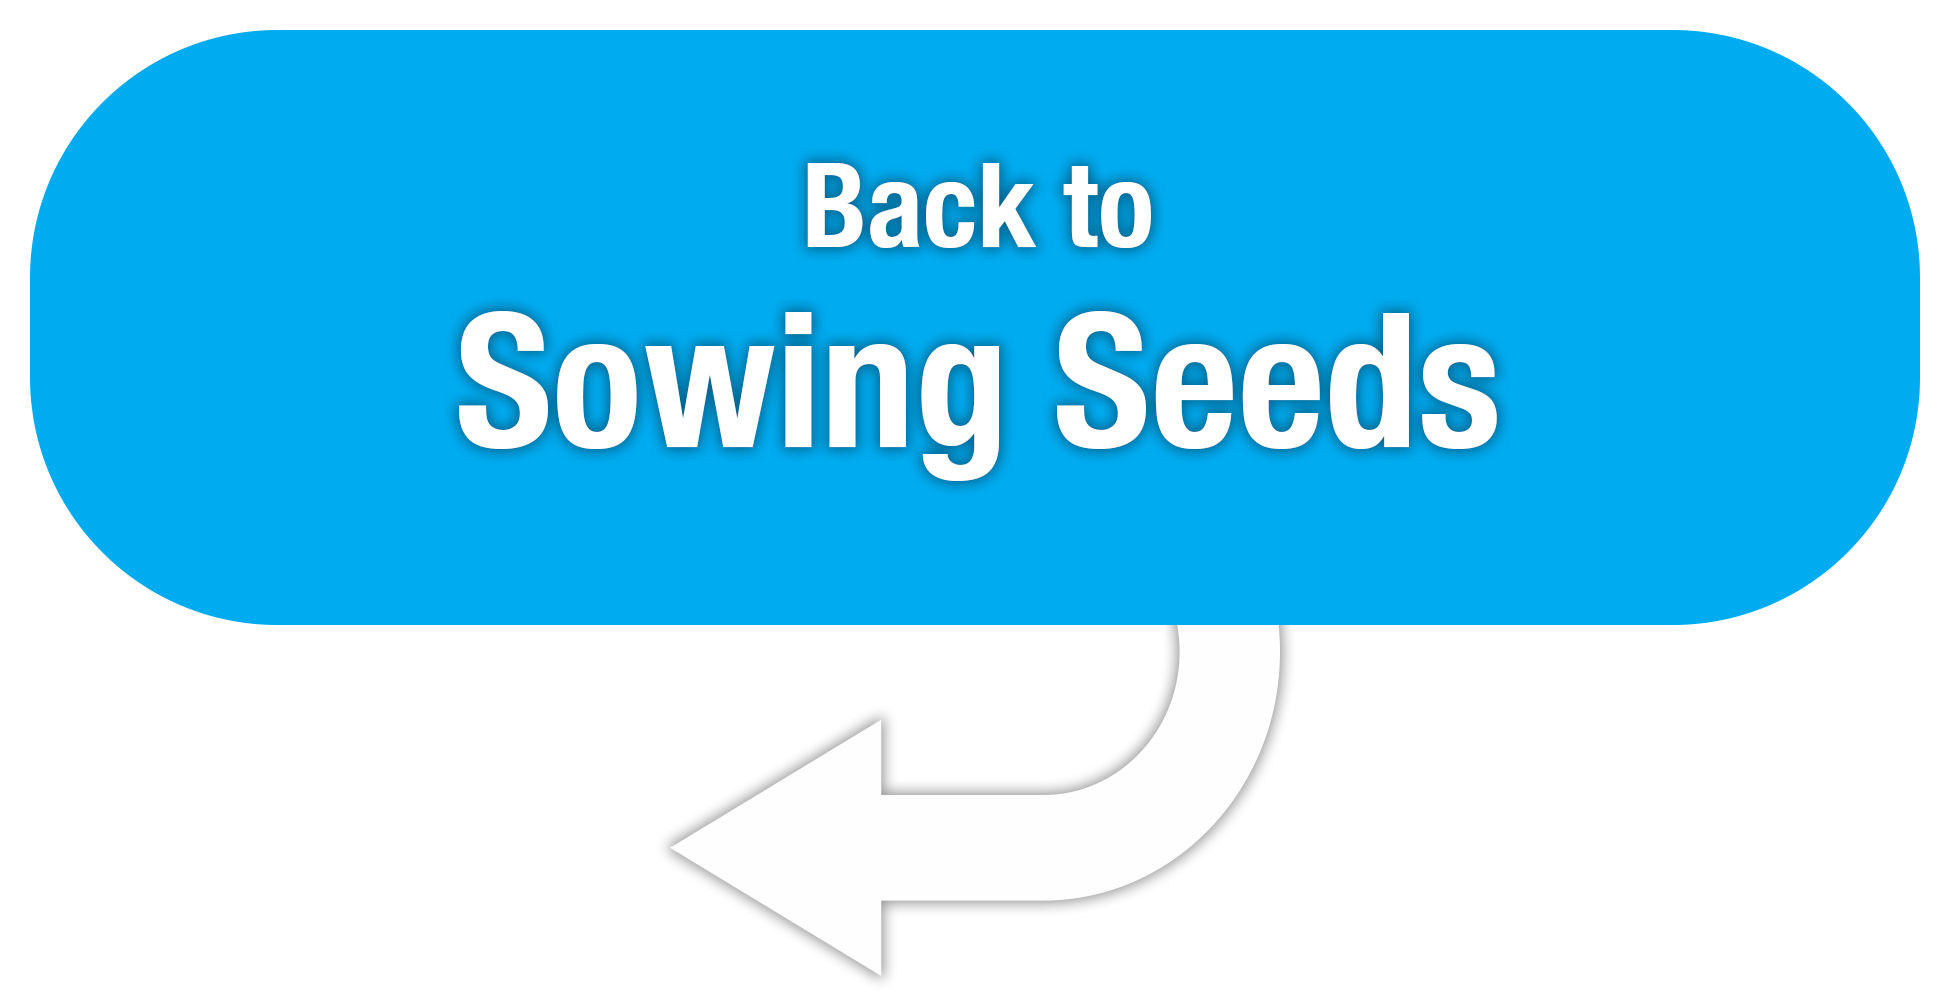 Back to Sowing Seeds